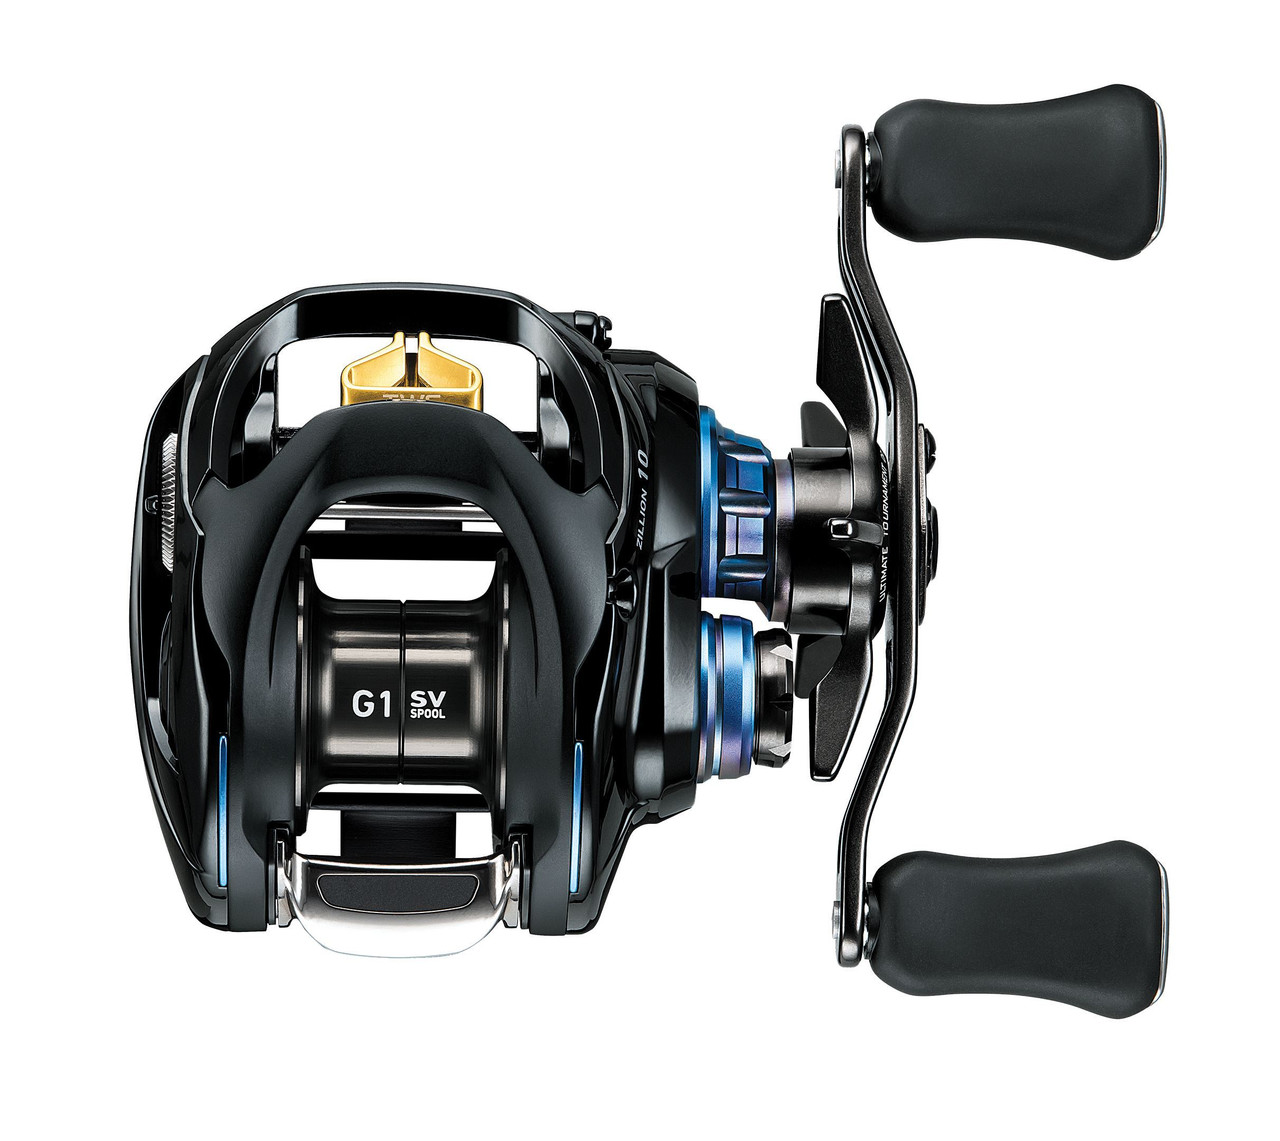 Coastal sv tw 150 - Fishing Rods, Reels, Line, and Knots - Bass